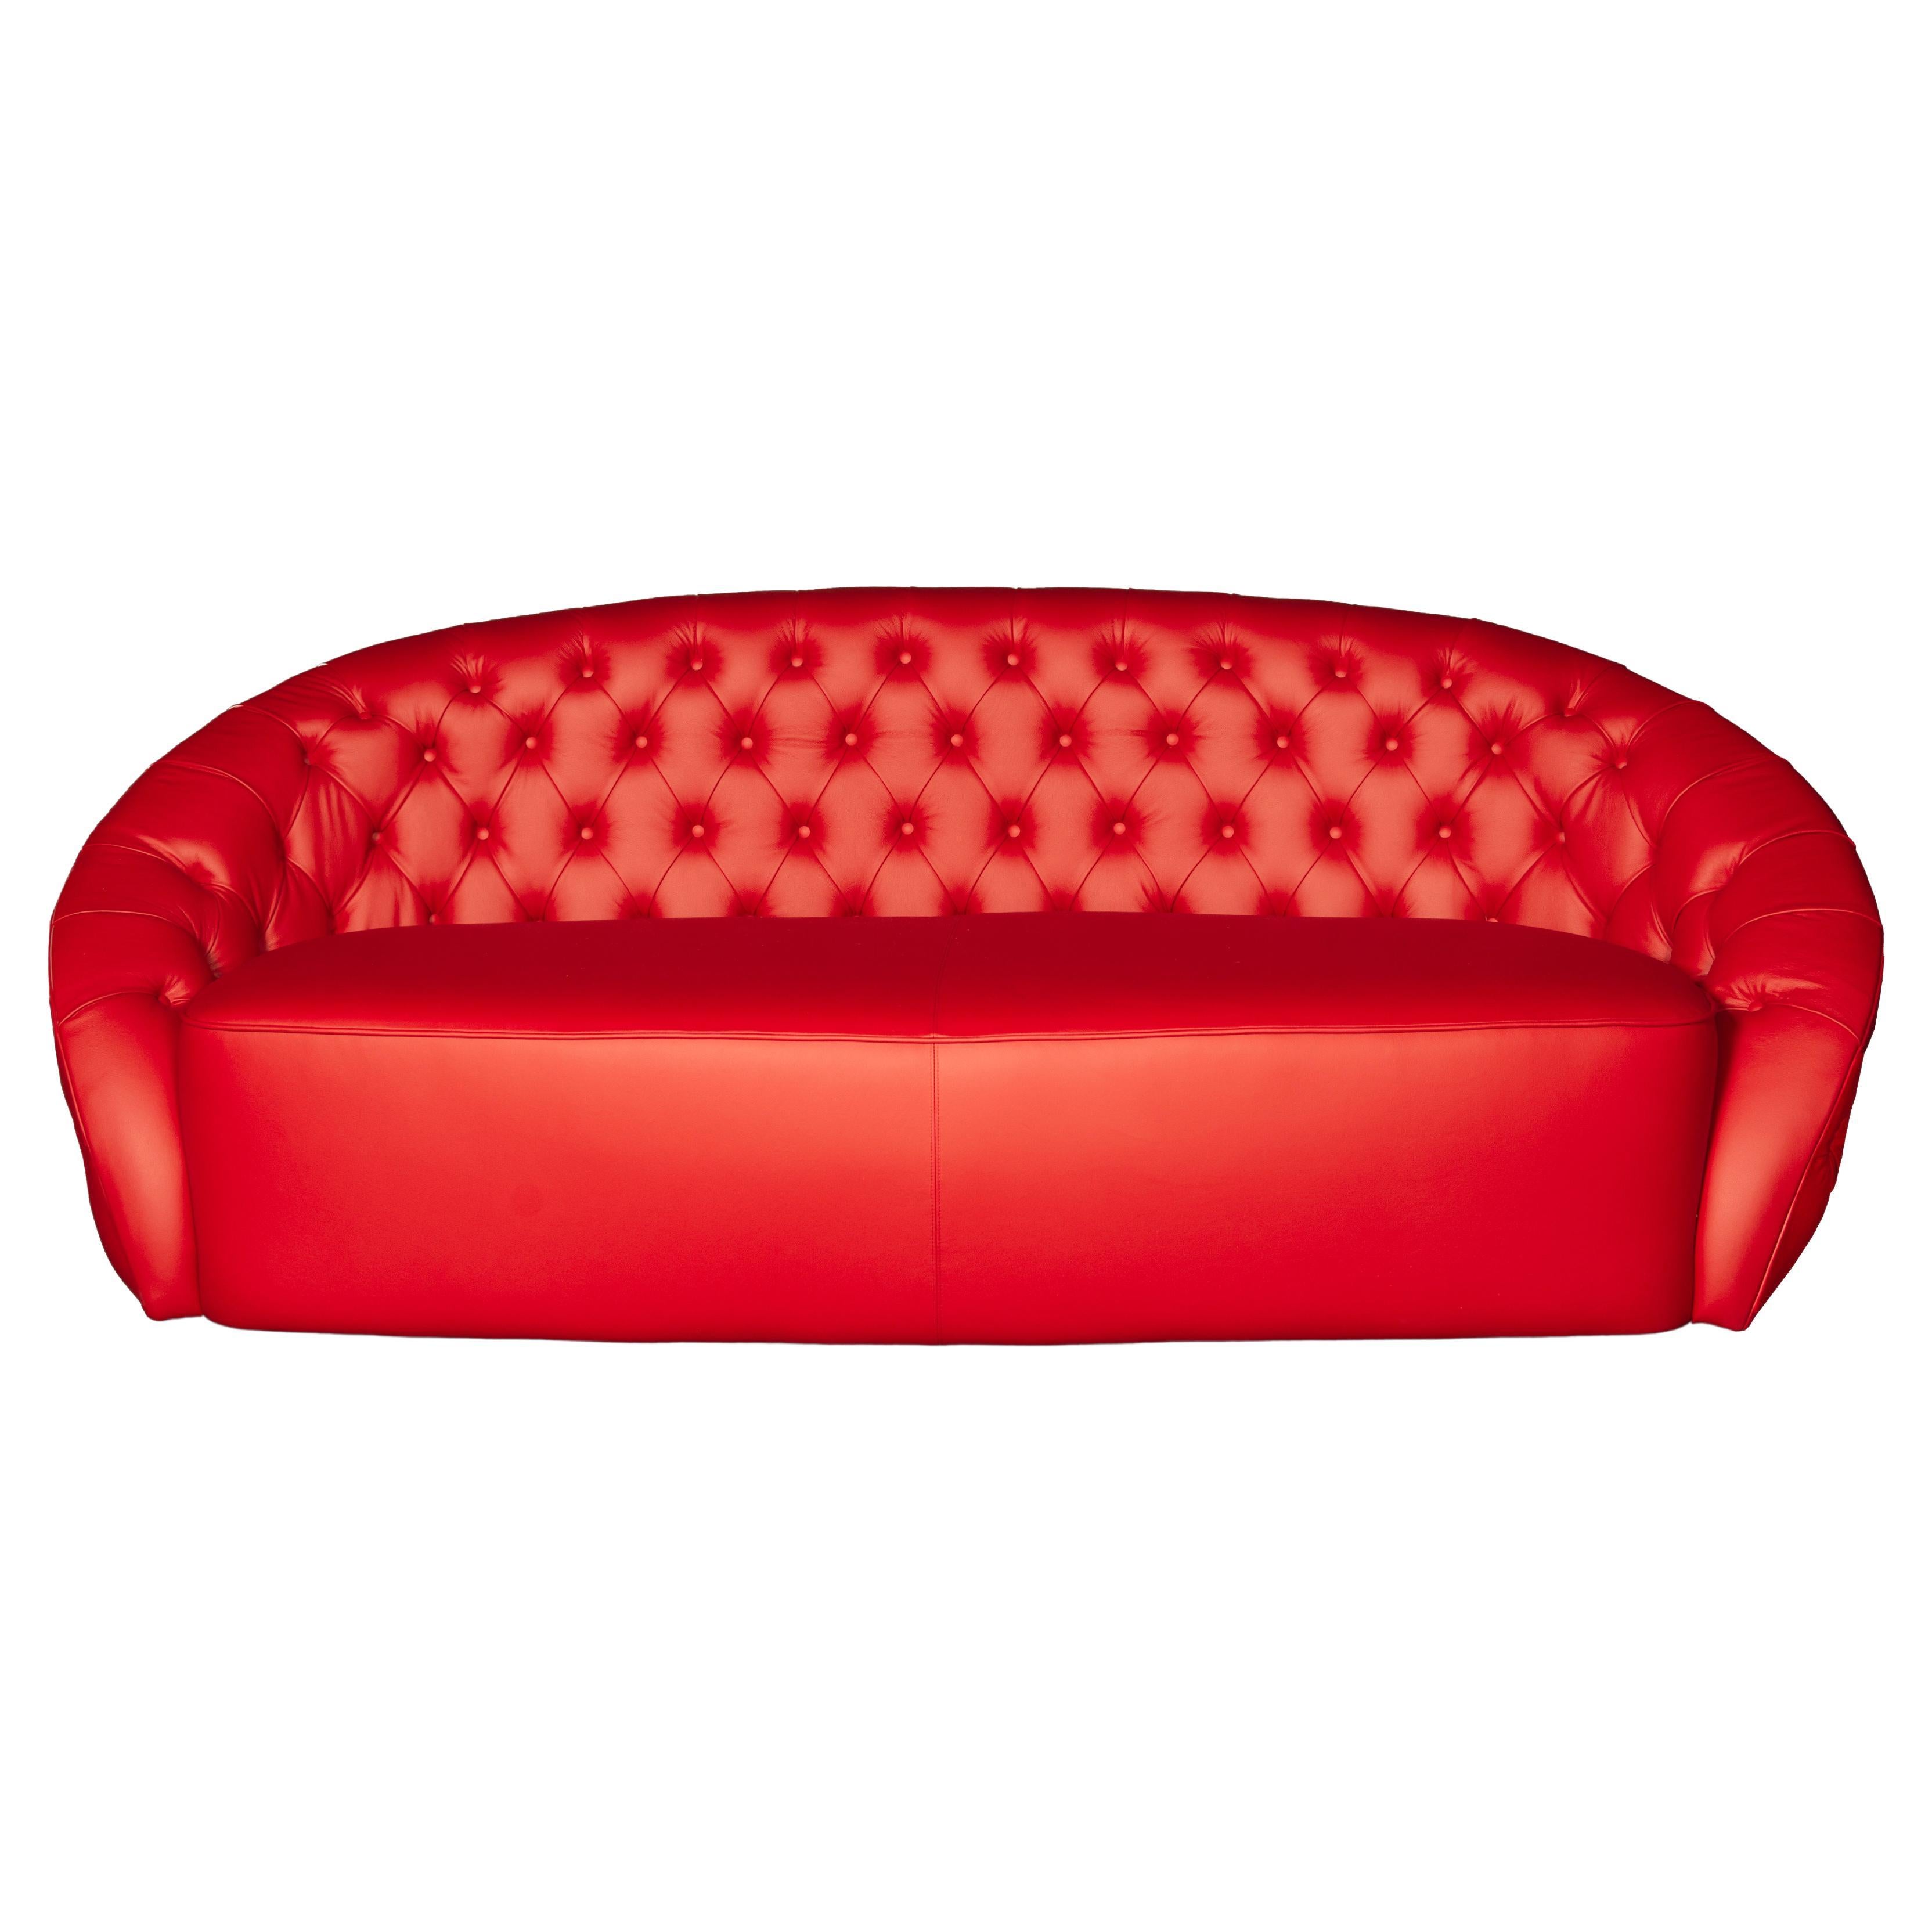 Sofa Round Capitonné, Red Leather, cm 250x115, Made in Italy For Sale